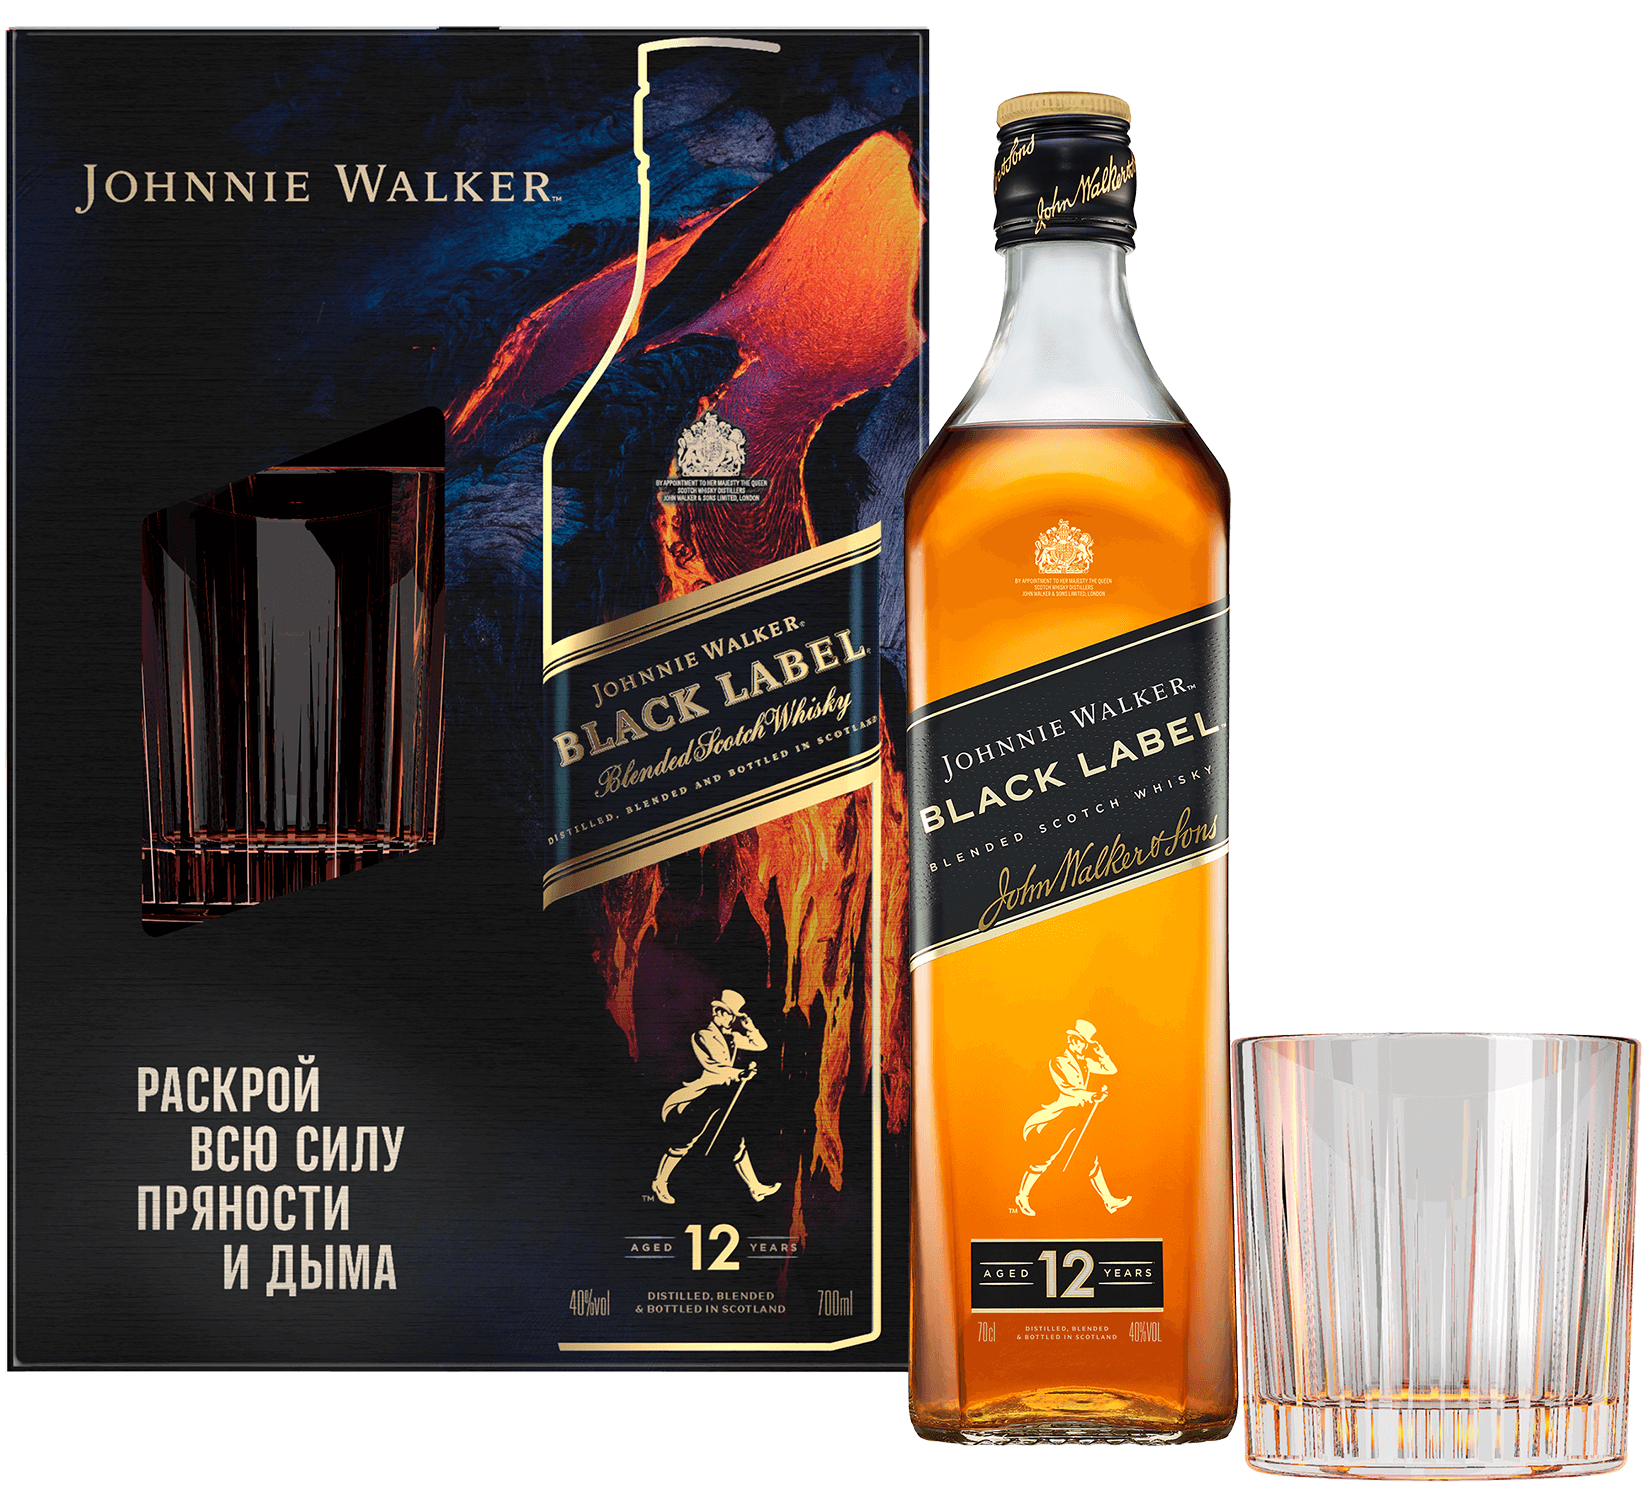 Johnnie Walker Black Label Blended Scotch Whisky (gift box with a glass) johnnie walker green label blended scotch whisky gift box